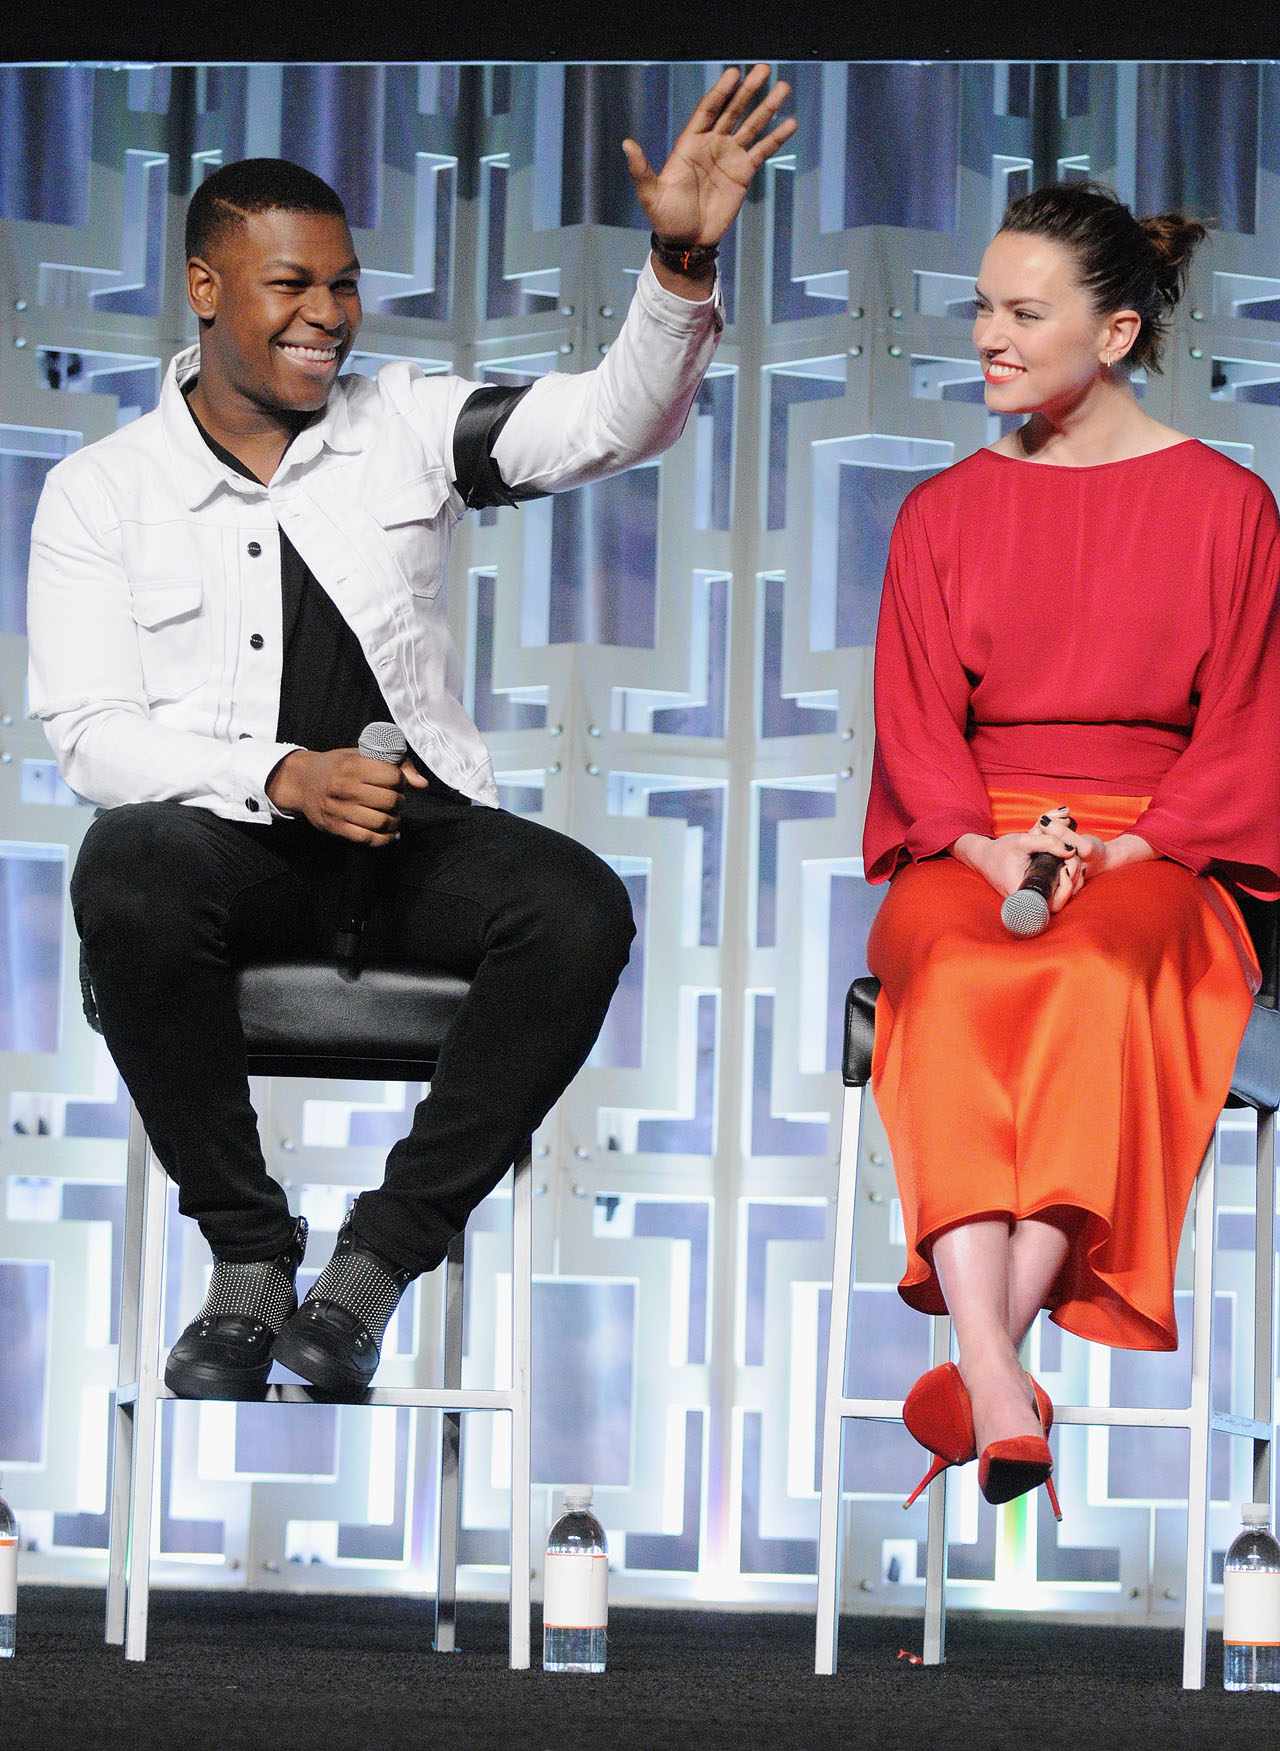 ORLANDO, FL - APRIL 14:  John Boyega and Daisy Ridley attend the STAR WARS: THE LAST JEDI PANEL during the 2017 STAR WARS CELEBRATION at Orange County Convention Center on April 14, 2017 in Orlando, Florida.  (Photo by Gerardo Mora/Getty Images for Disney) *** Local Caption *** John Boyega;Daisy Ridley